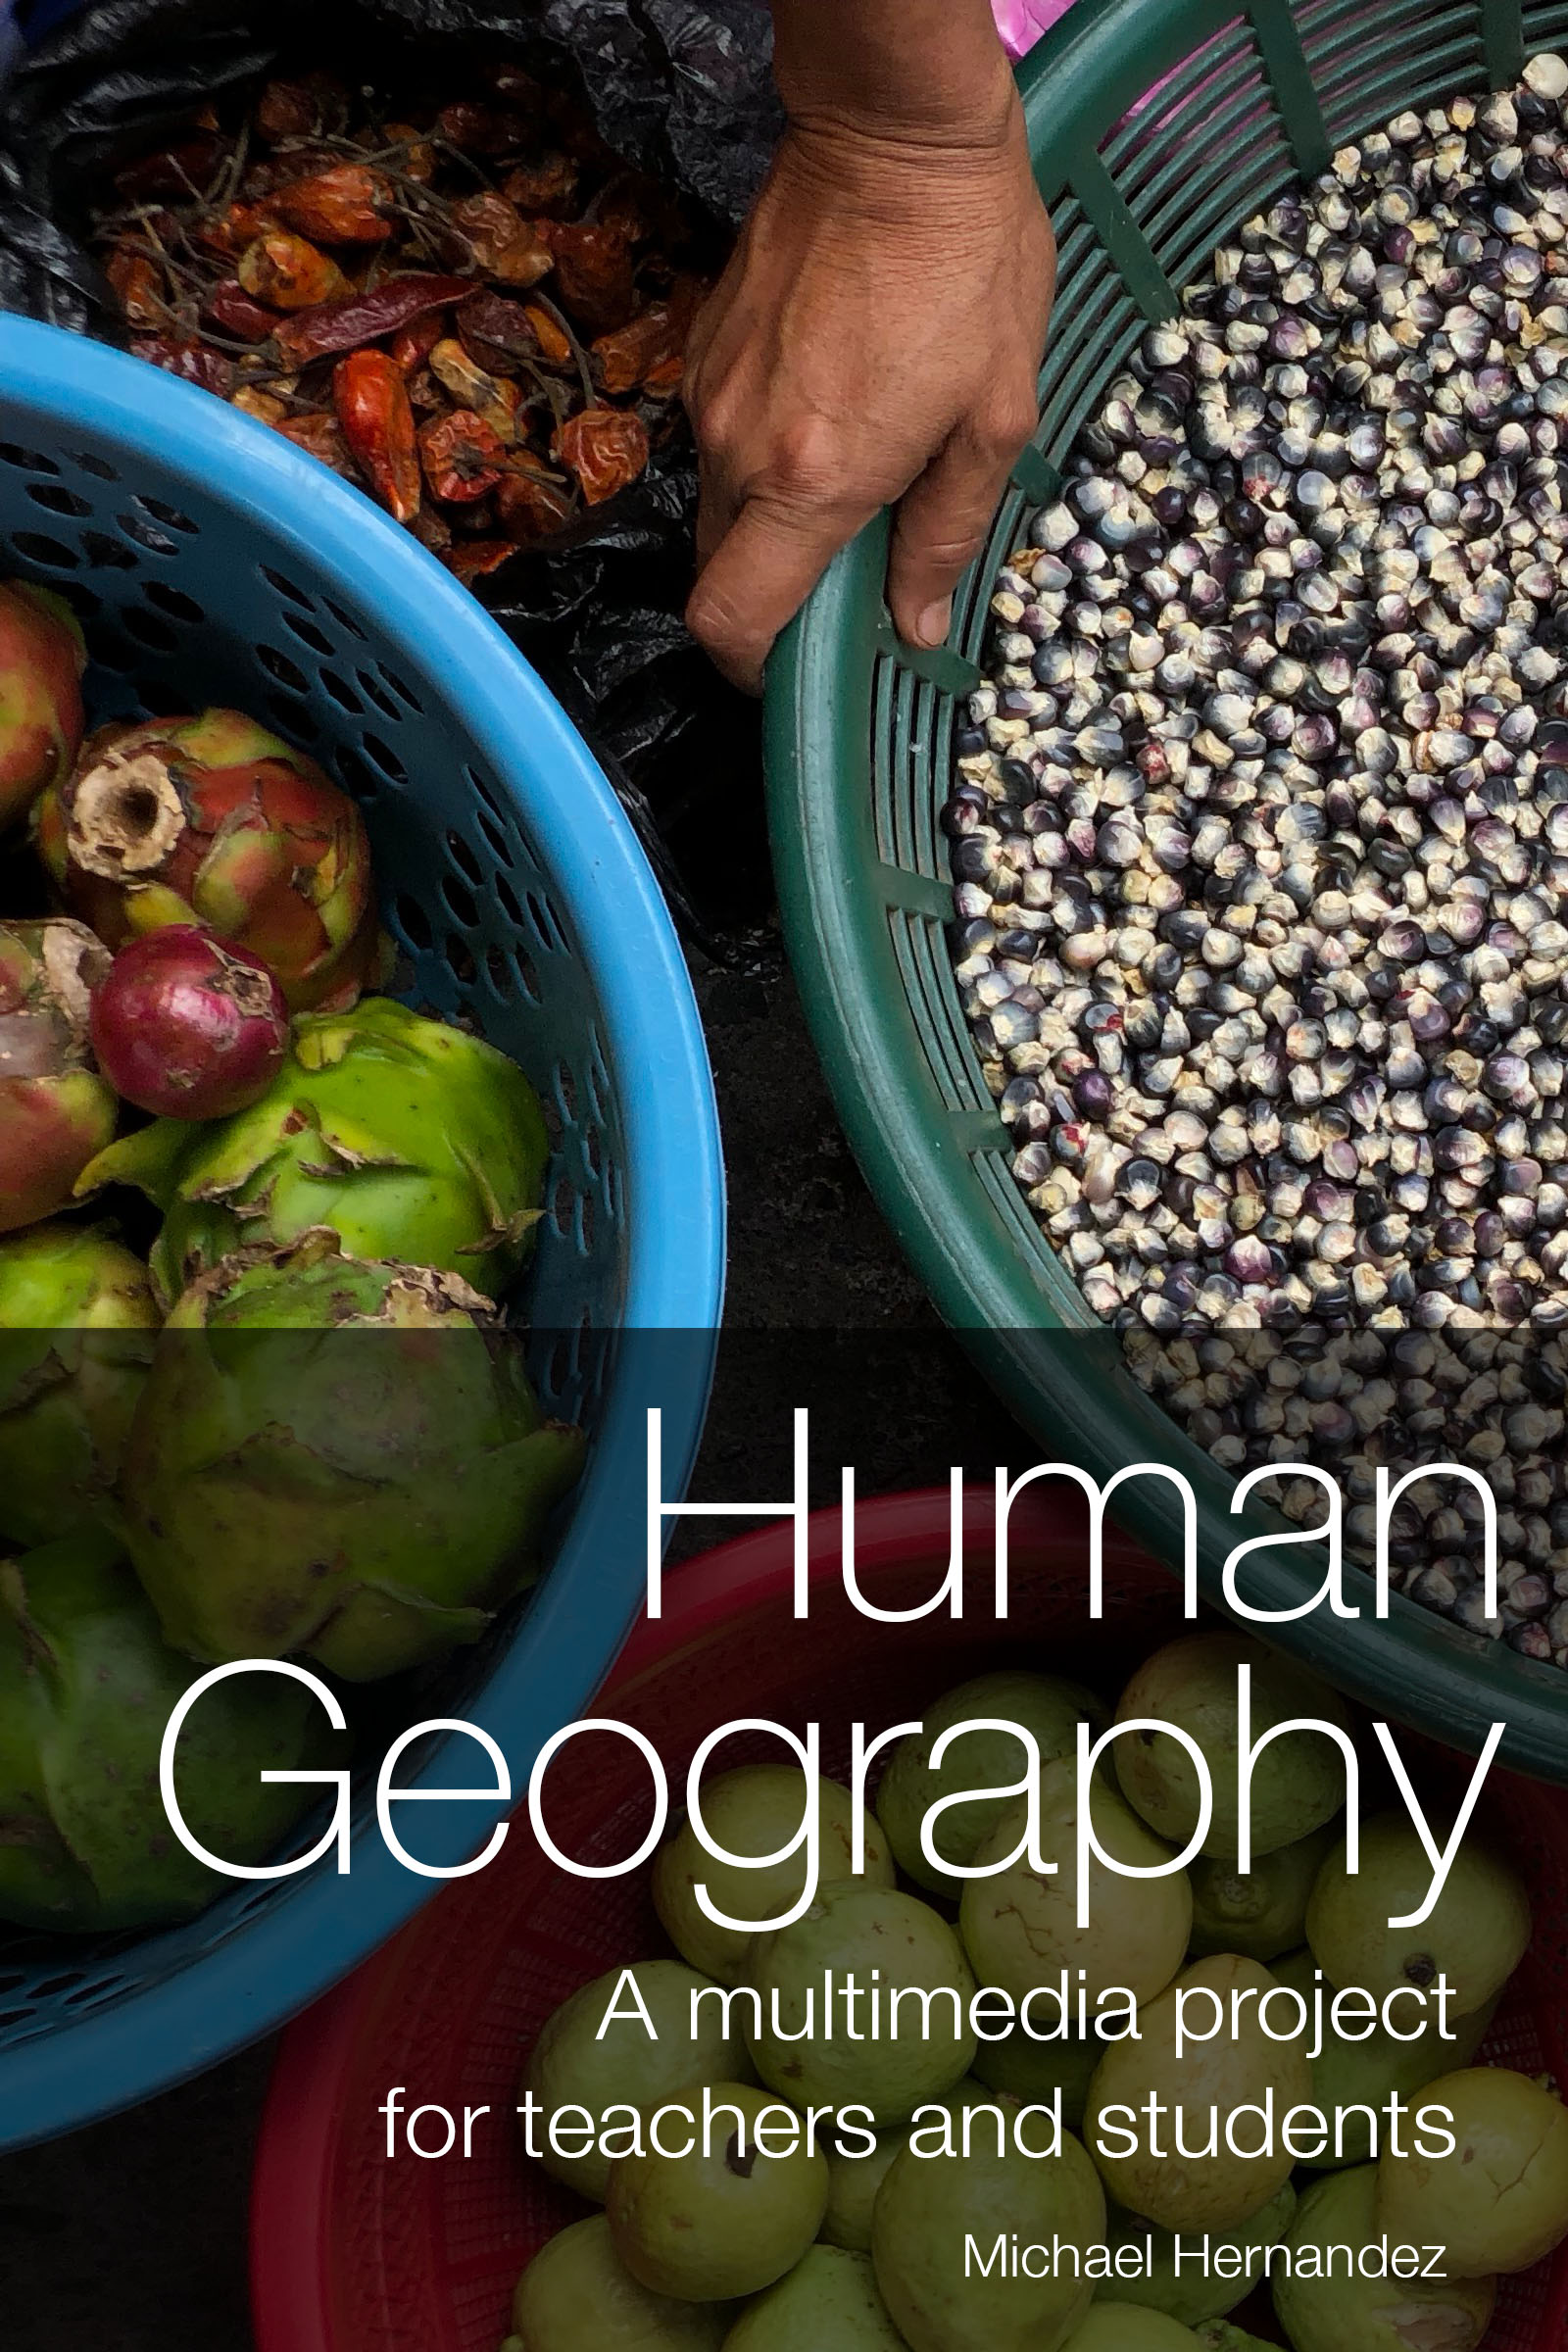 cover of the digital book "Human Geography" with a photo of a hand reaching for vegetables in a market